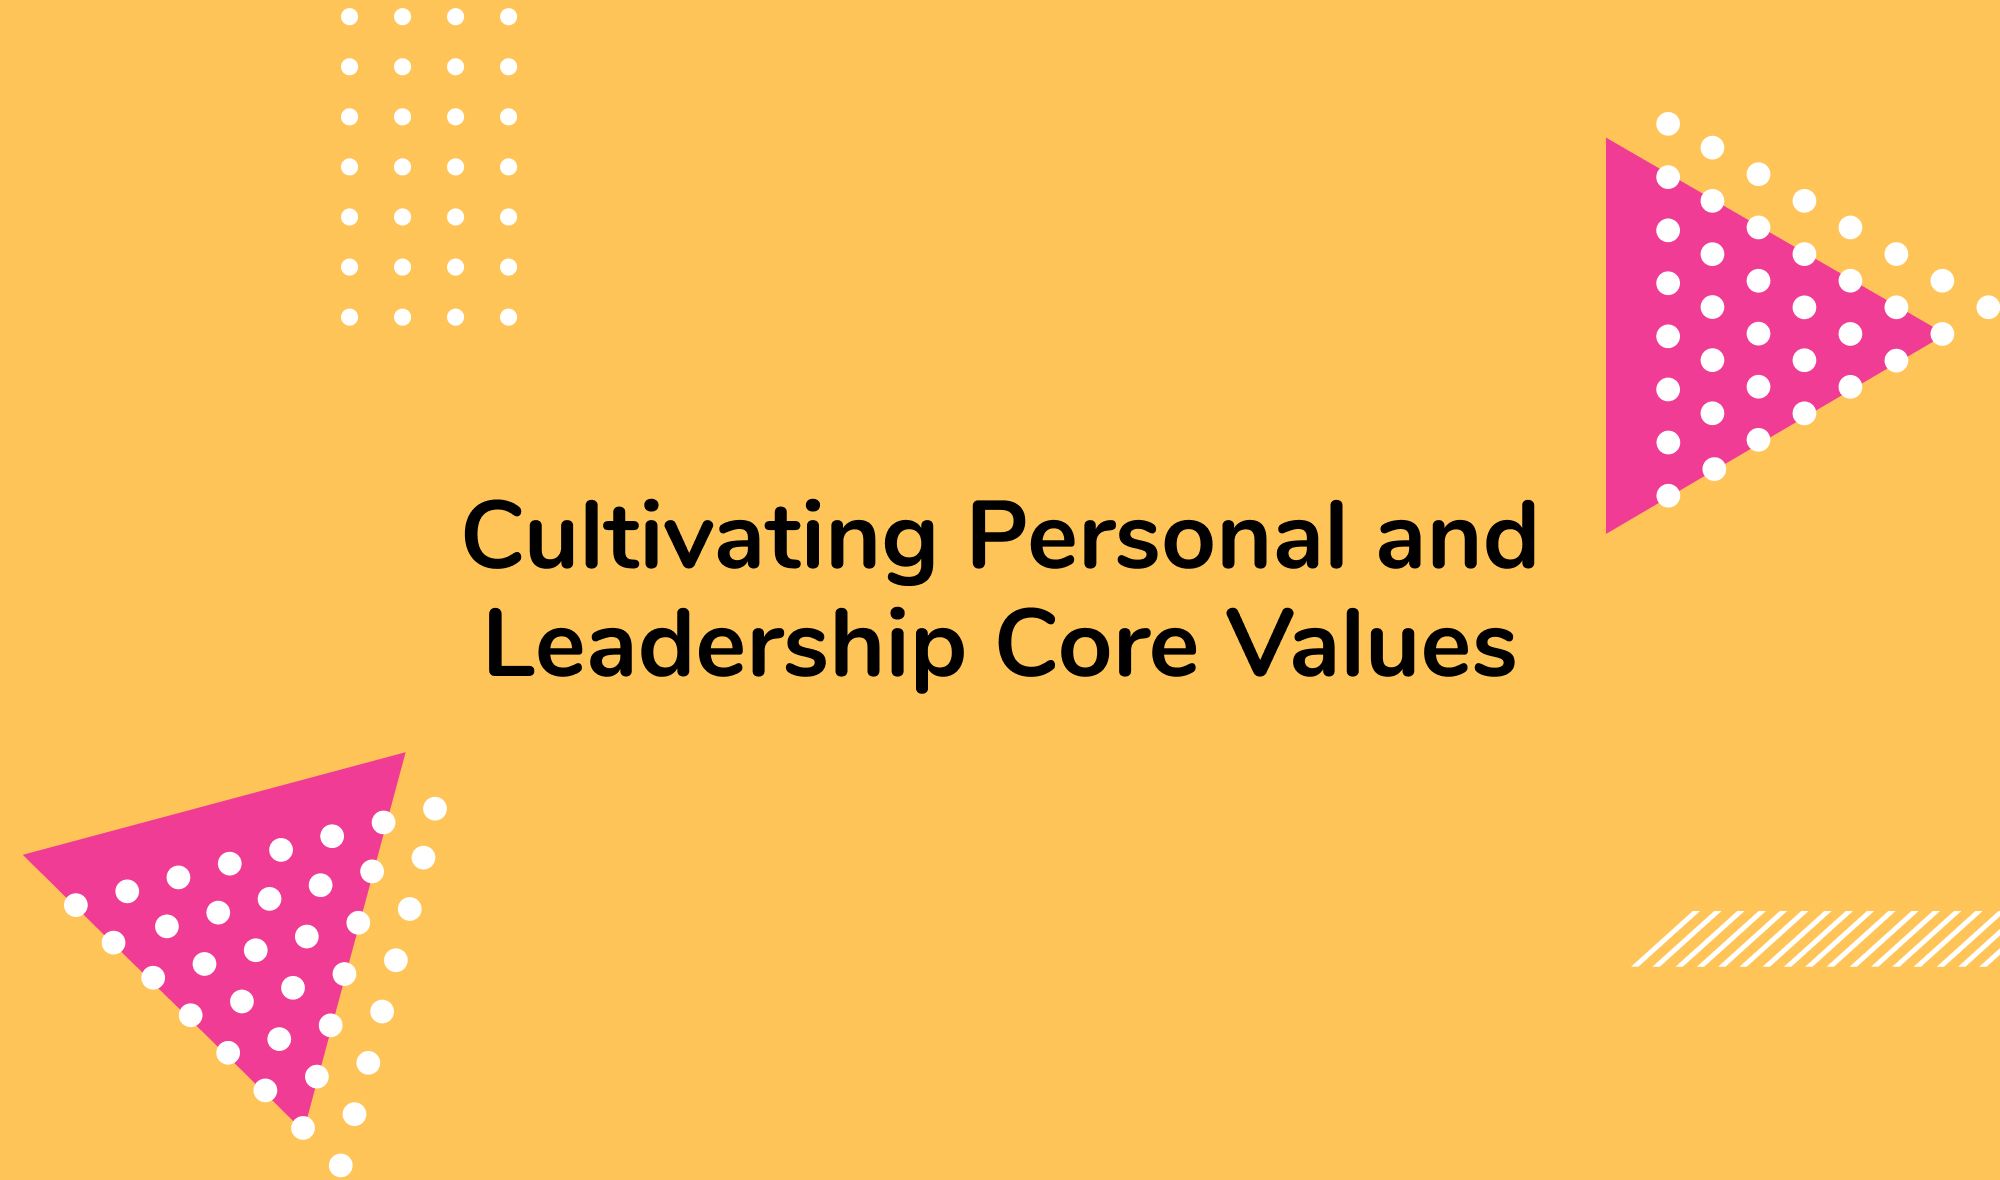 Cultivating Personal Values and Leadership Core Values: A Roadmap